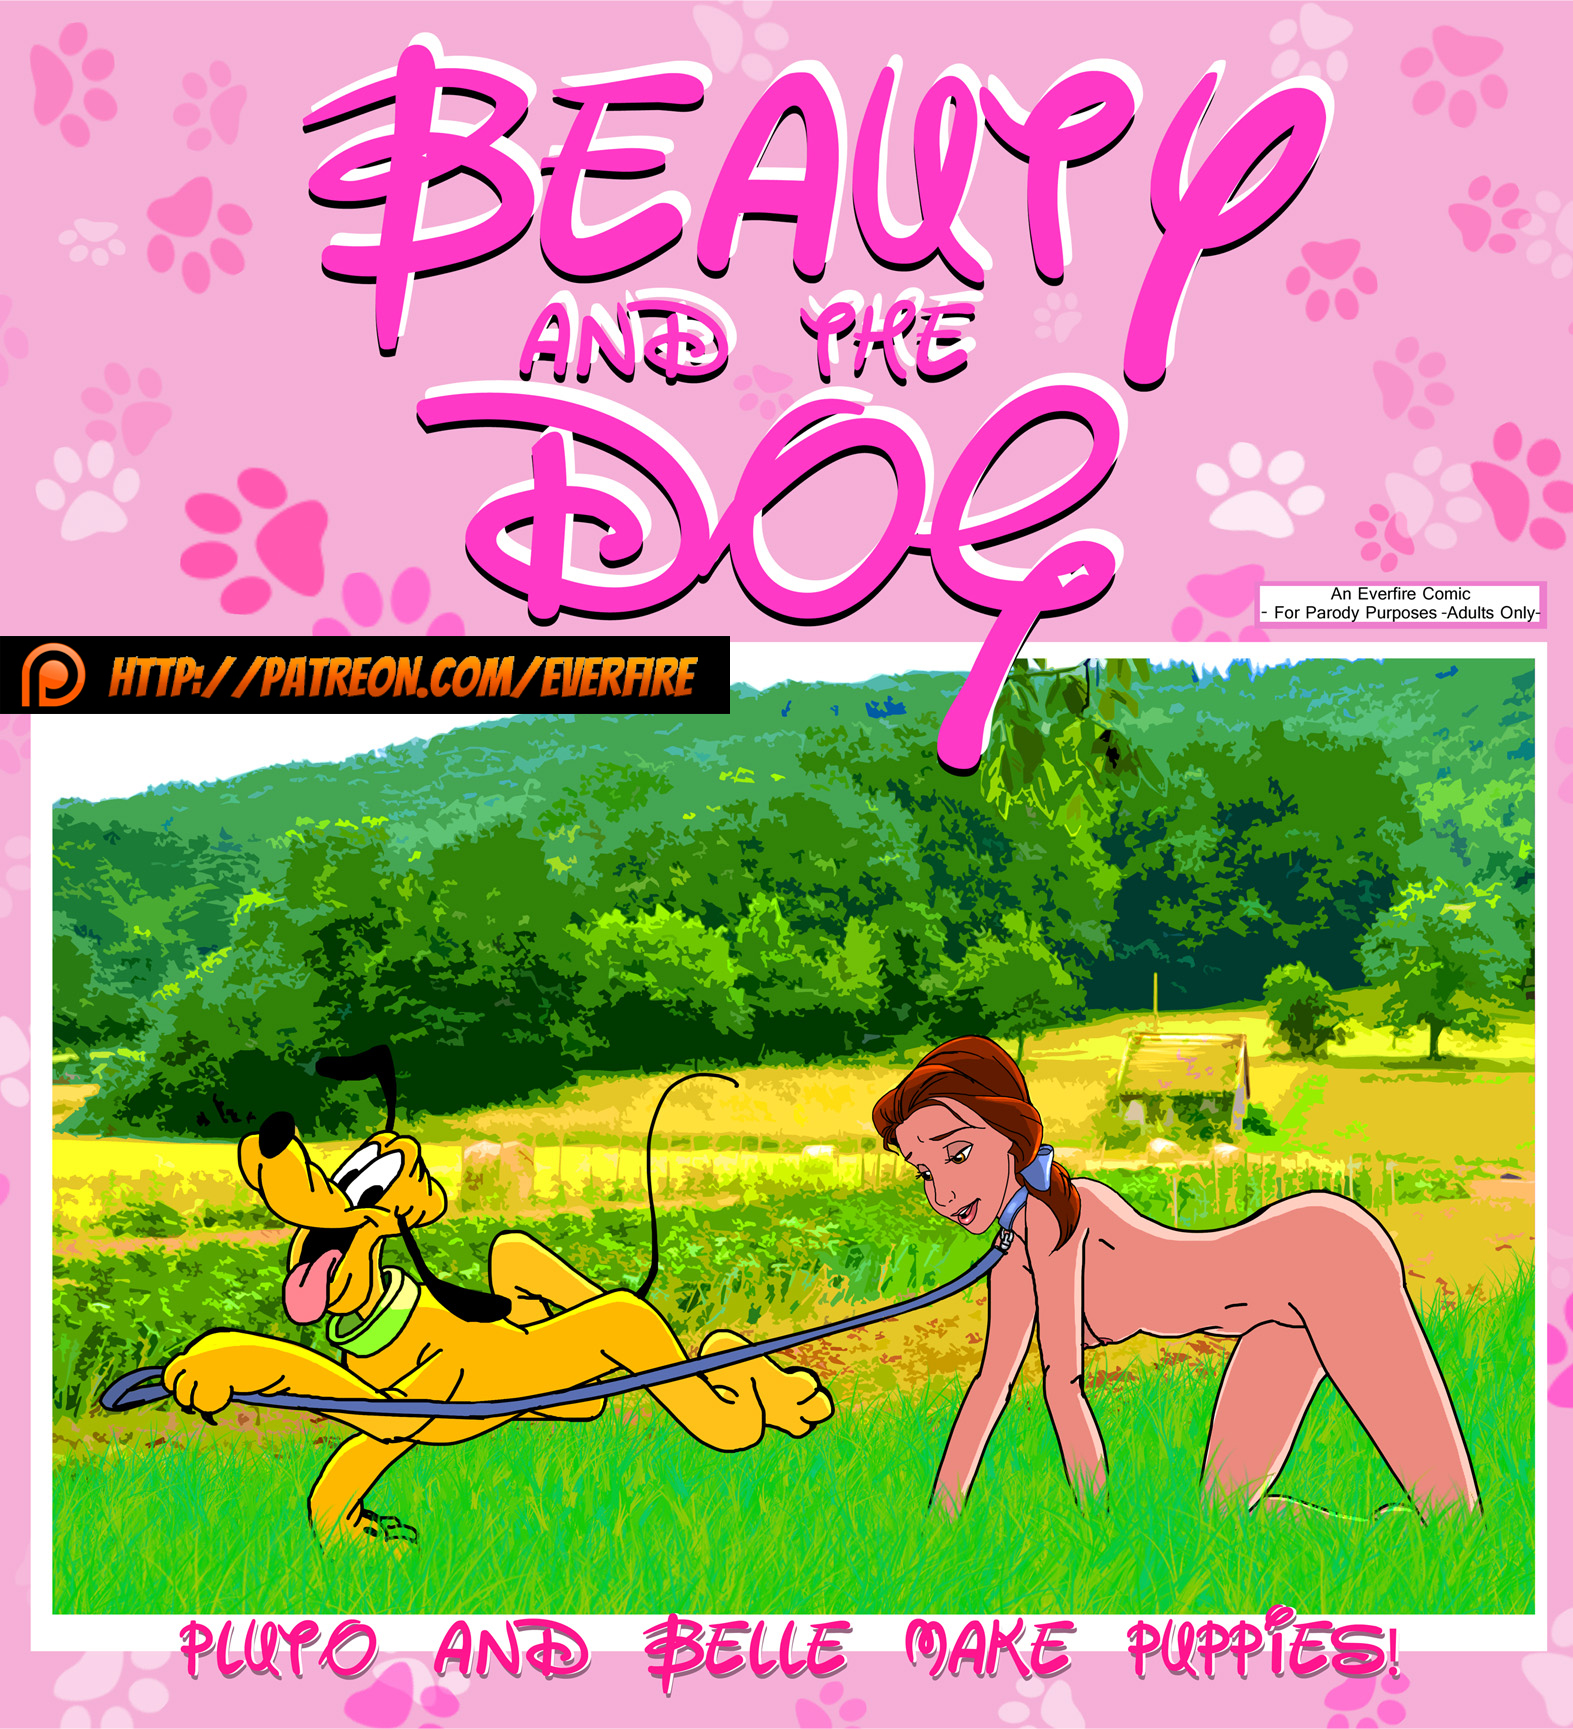 Beauty-And-The-Dog-Pluto-And-Belle-Make-Puppies-00-Cover__Gotofap.tk__36712838.jpg